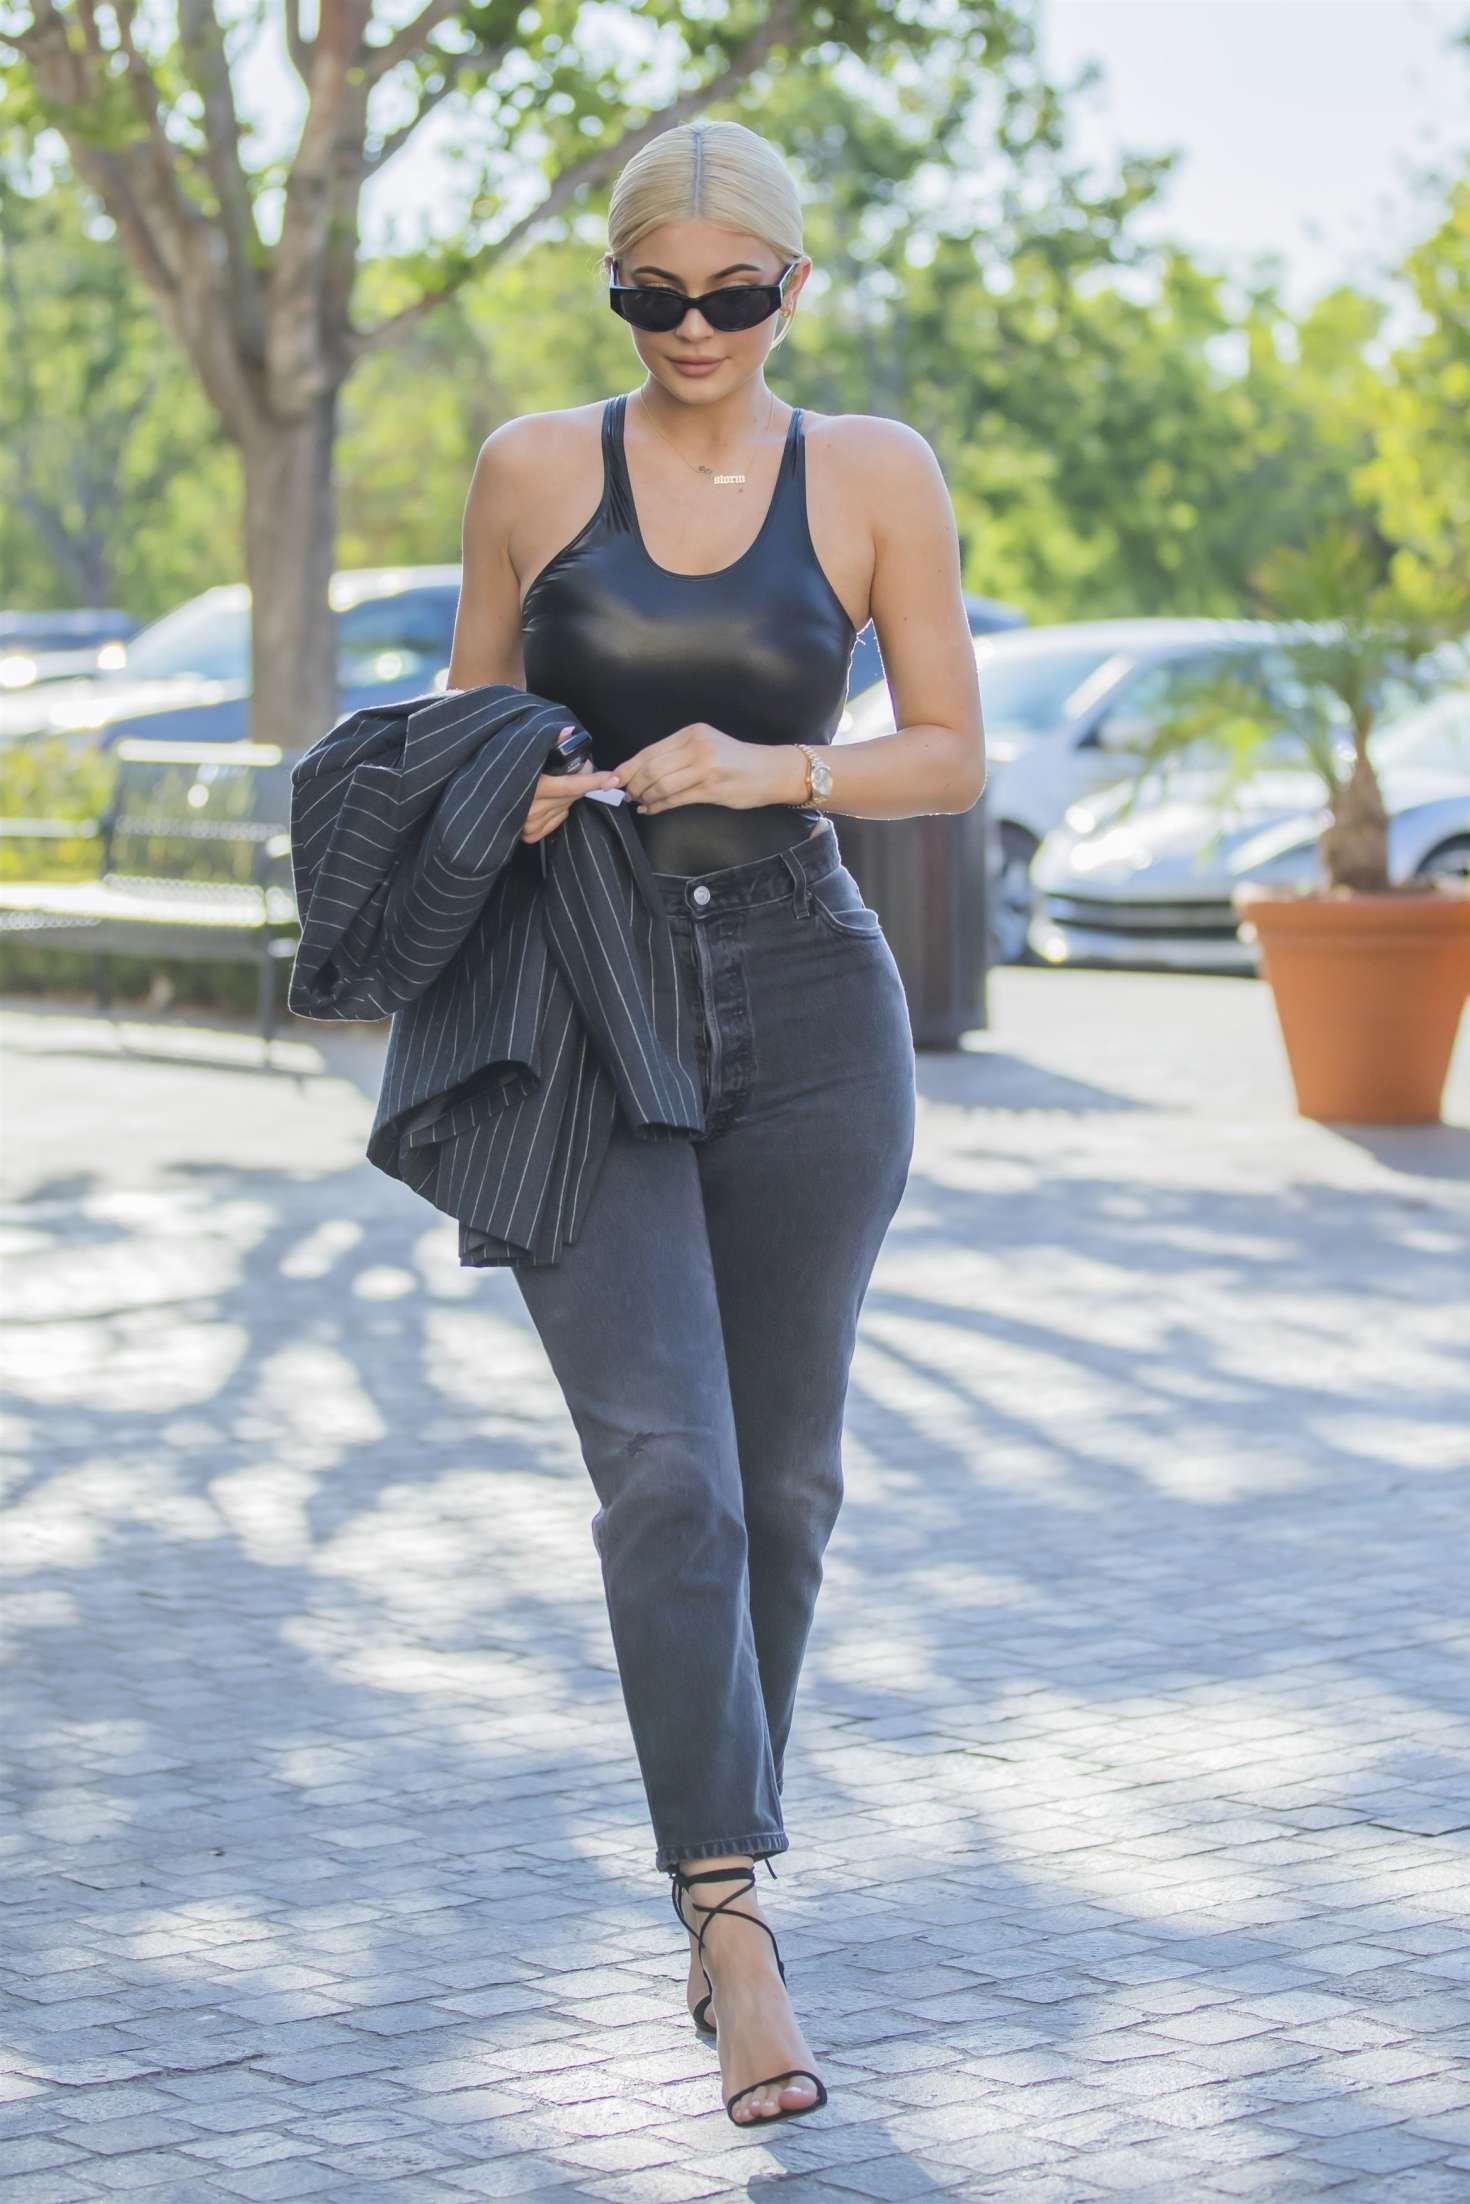 Kylie Jenner at Polacheckâ€™s Jewlers in Calabasas